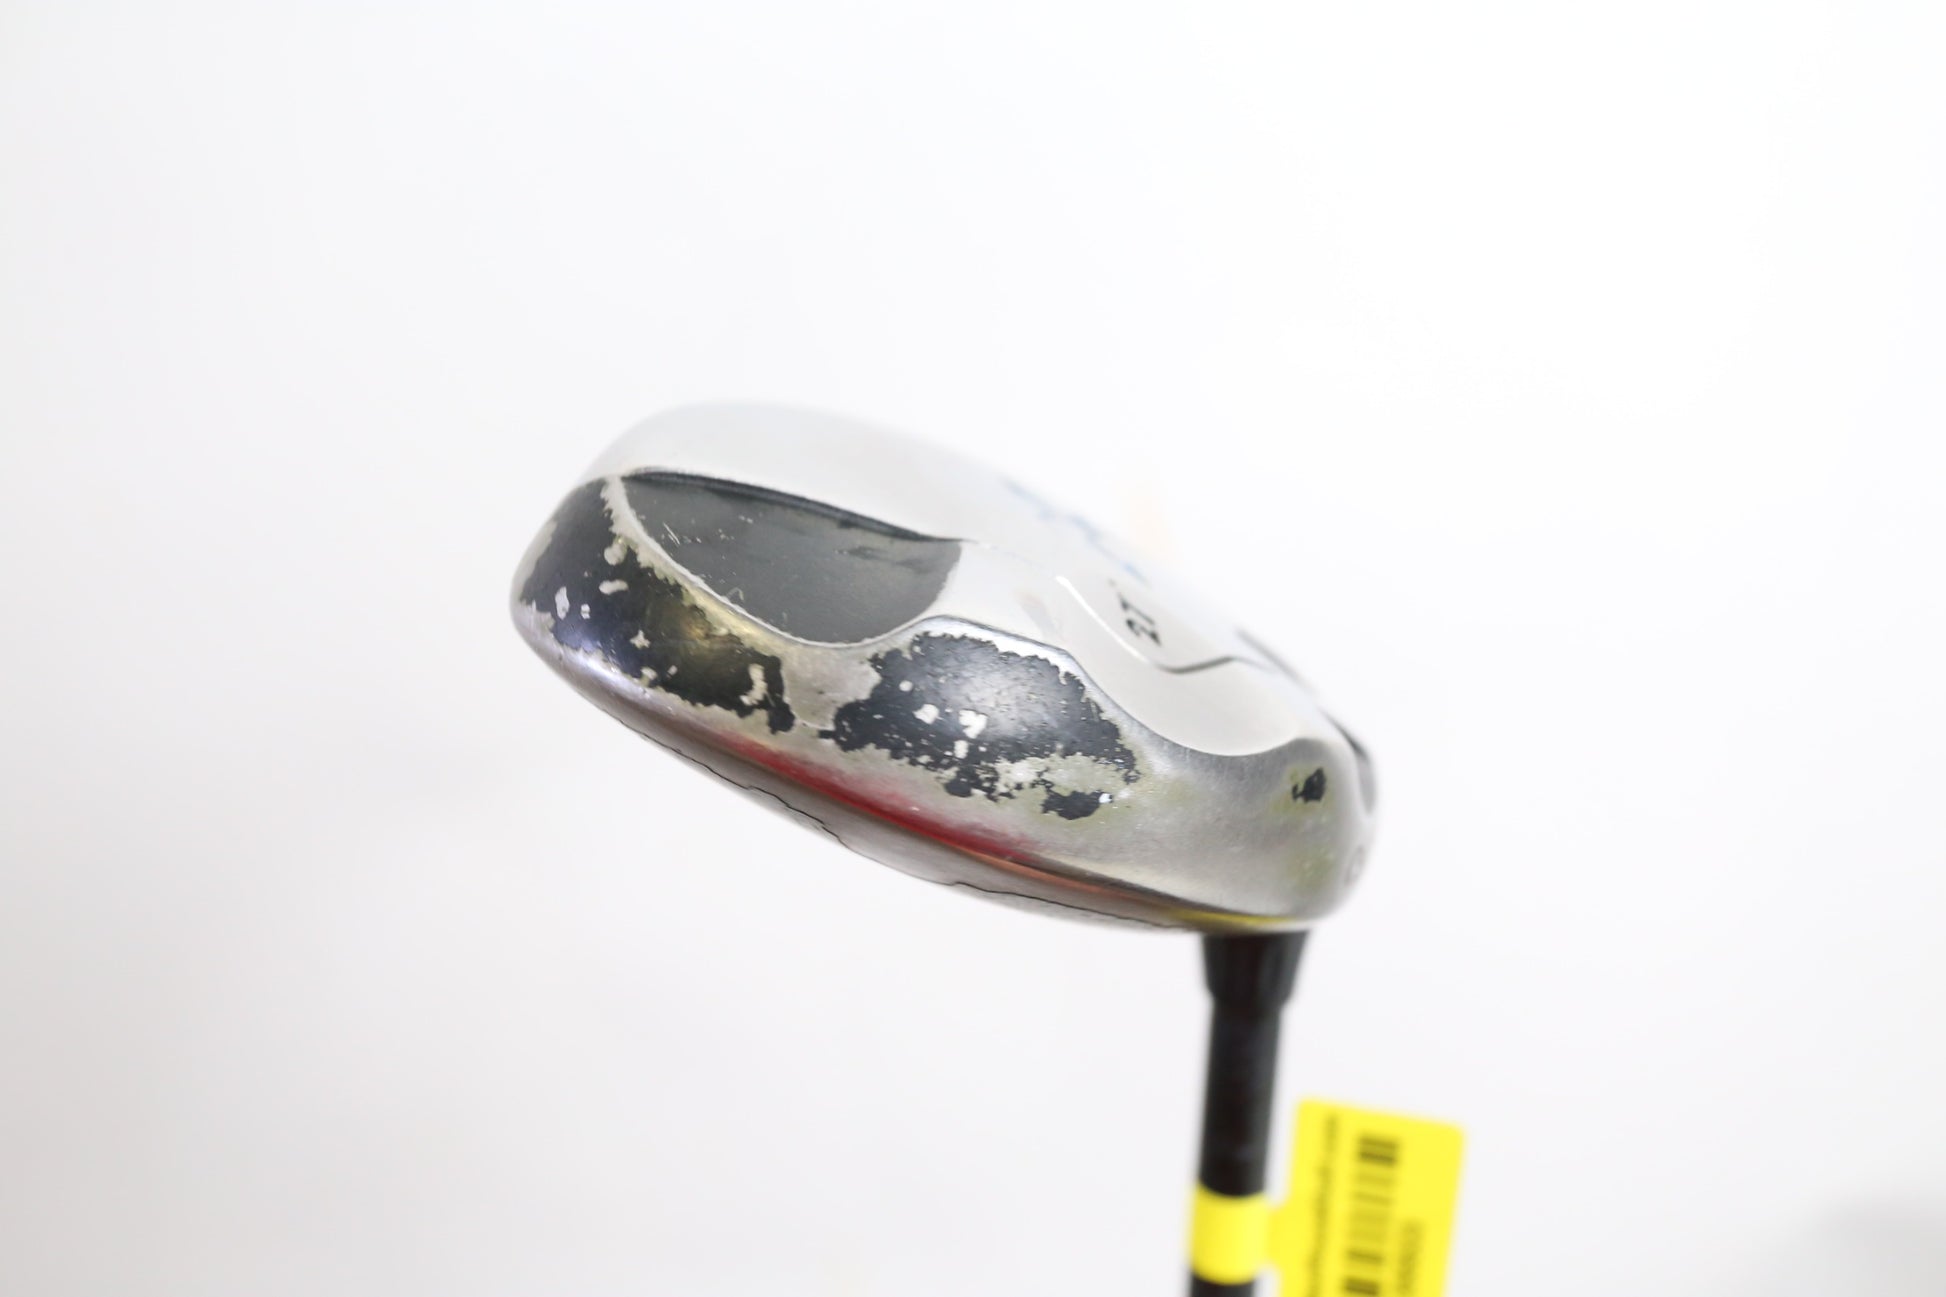 Used Callaway X 5H Hybrid - Right-Handed - 27 Degrees - Ladies Flex-Next Round